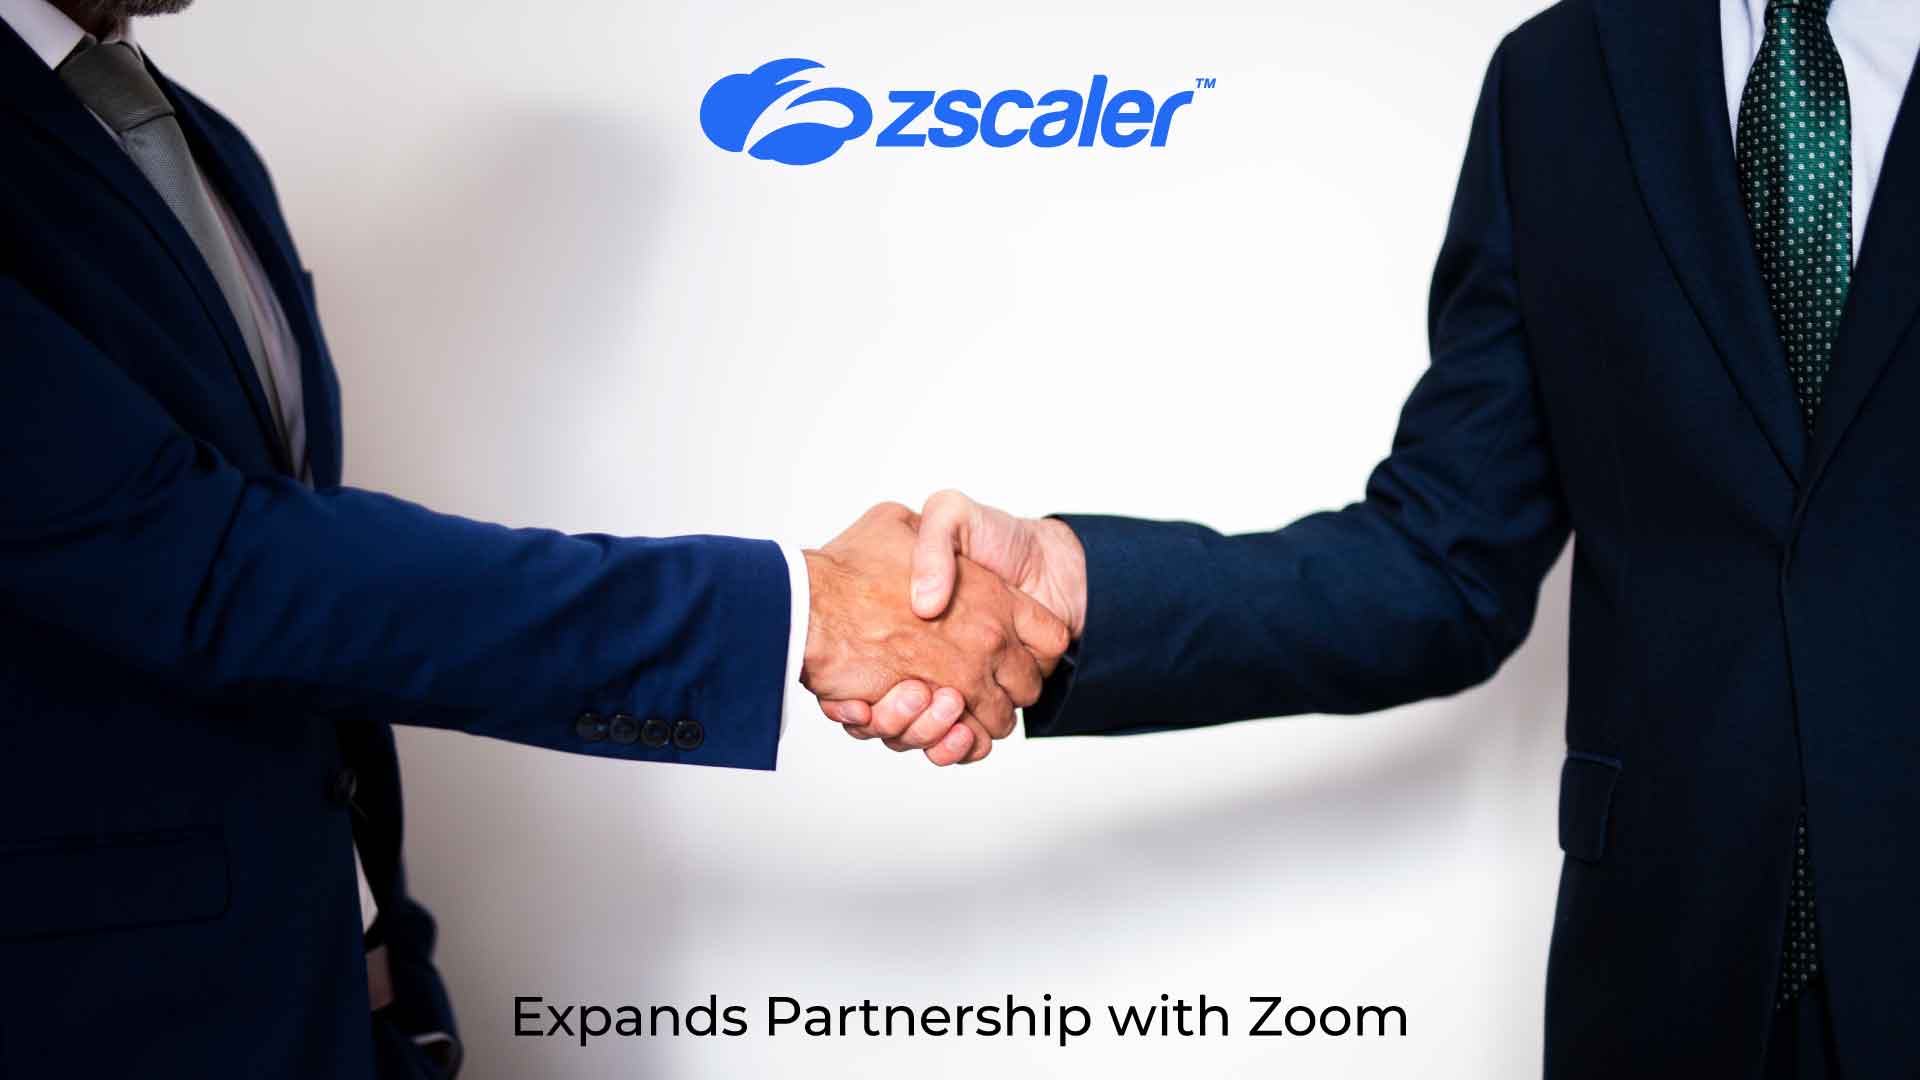 Zscaler Expands Partnership with Zoom, Unveiling New Integration with Zoom’s Quality of Service Subscription (QSS)